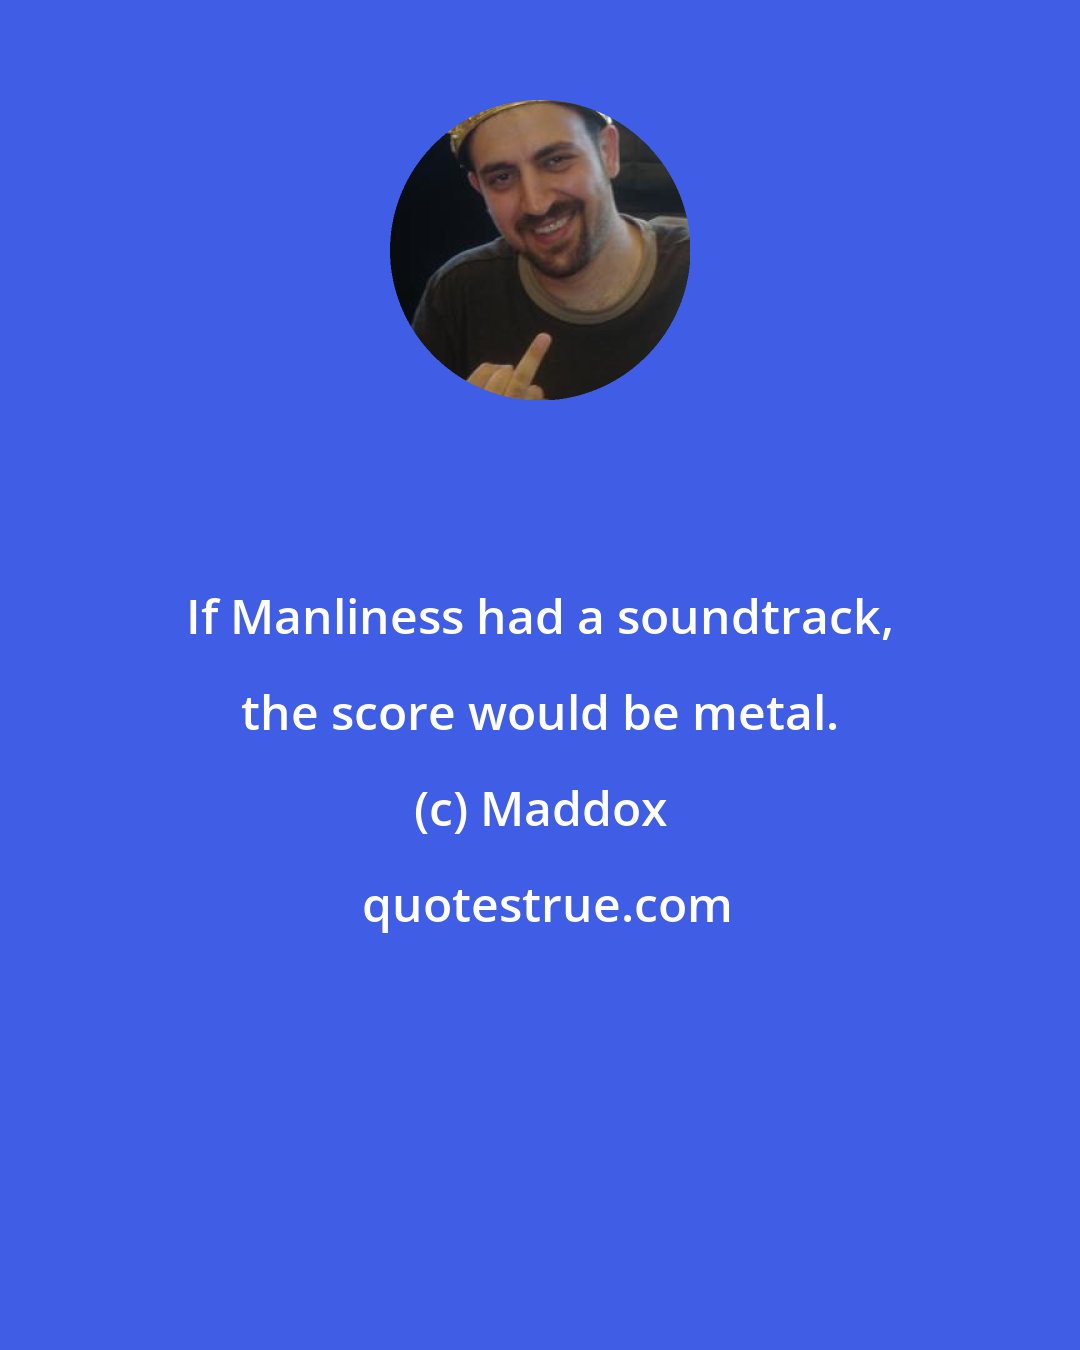 Maddox: If Manliness had a soundtrack, the score would be metal.